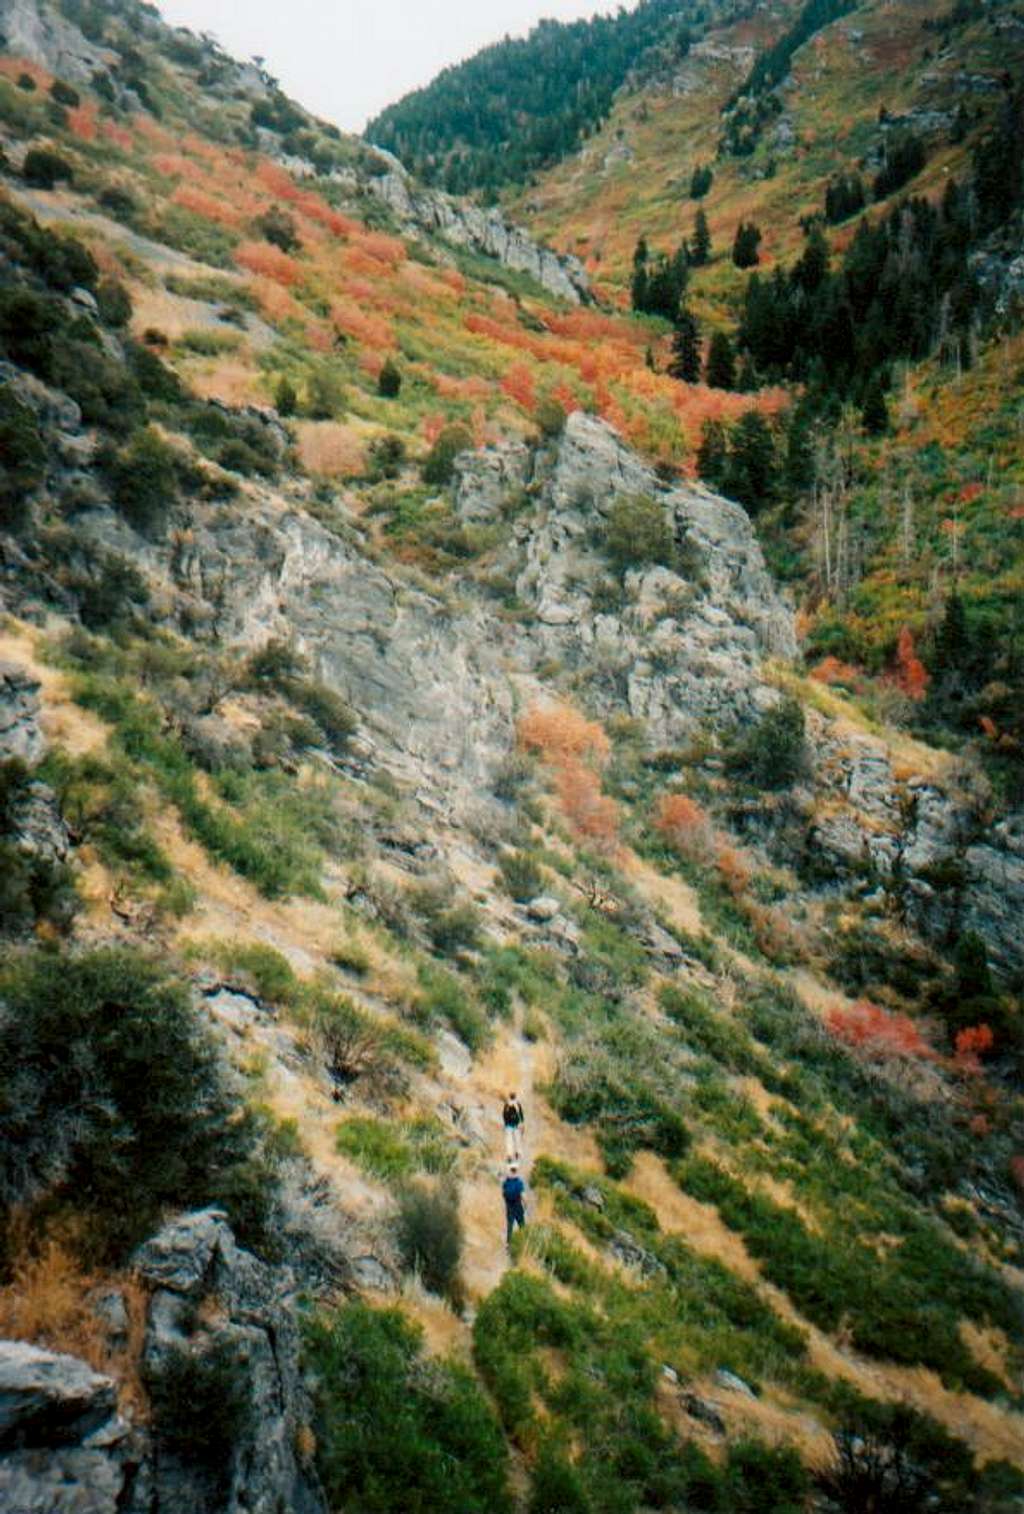 Hikers in canyon south of Y Mountain